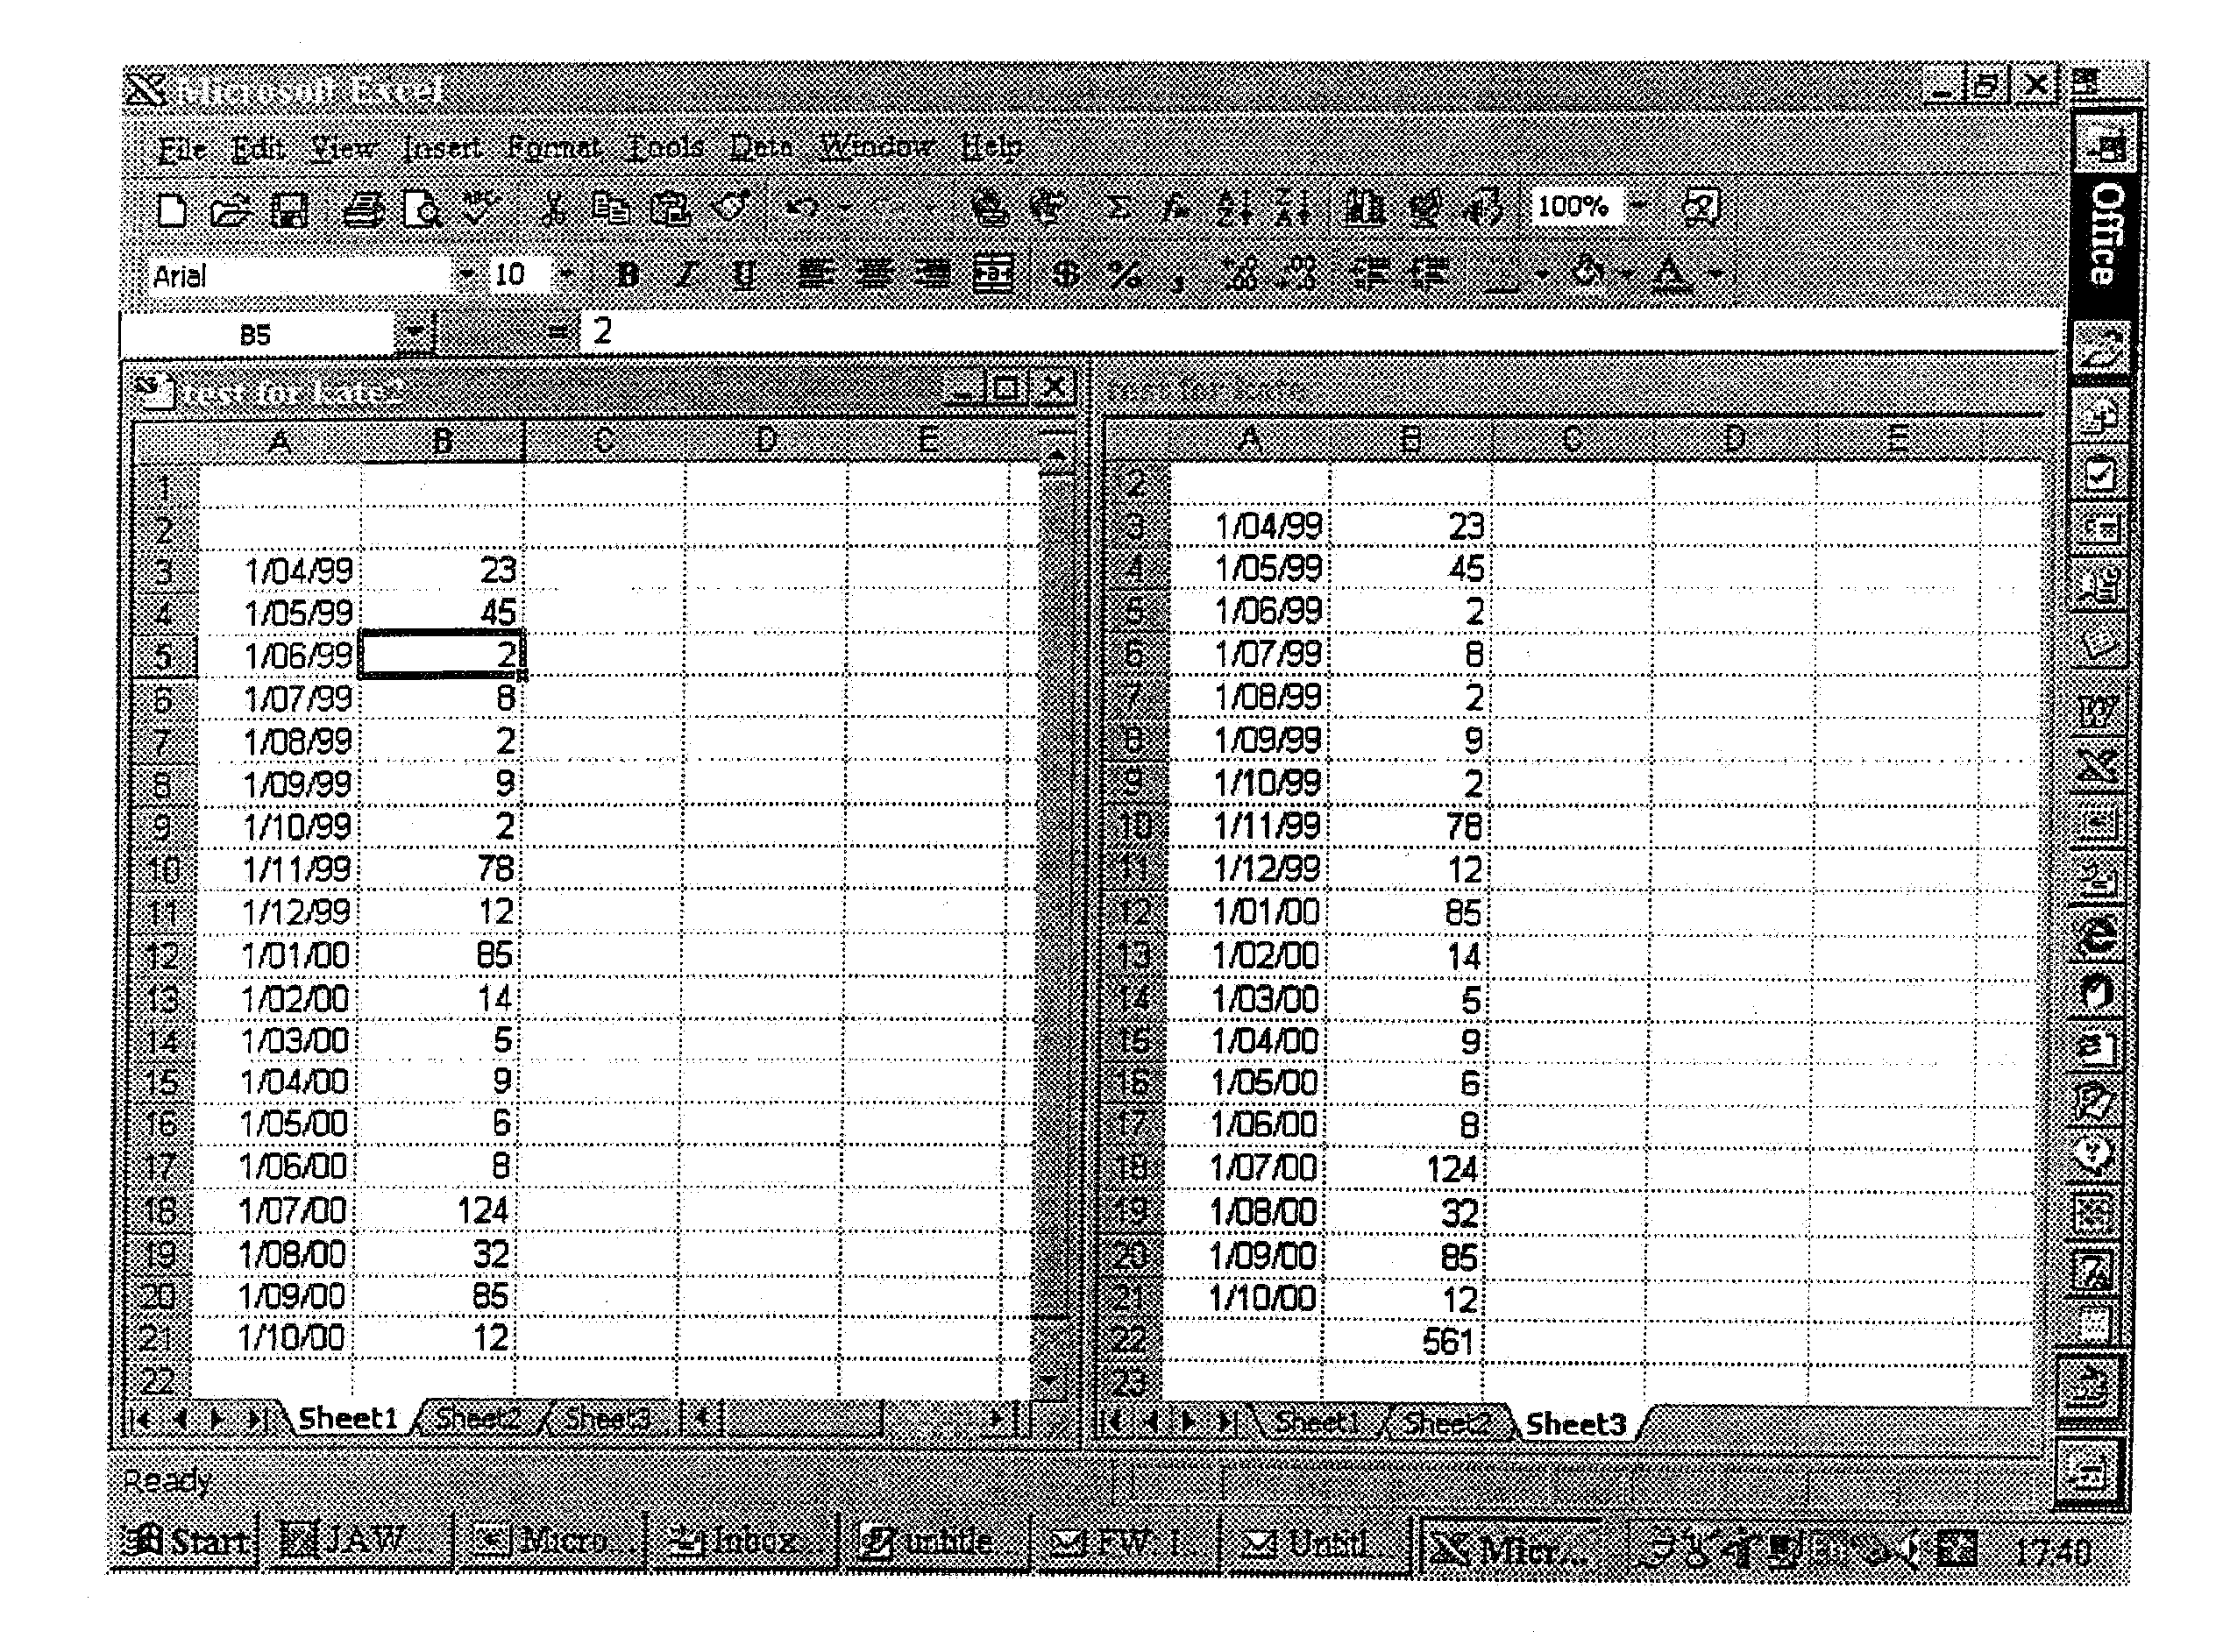 Method and system for assigning screen designation codes